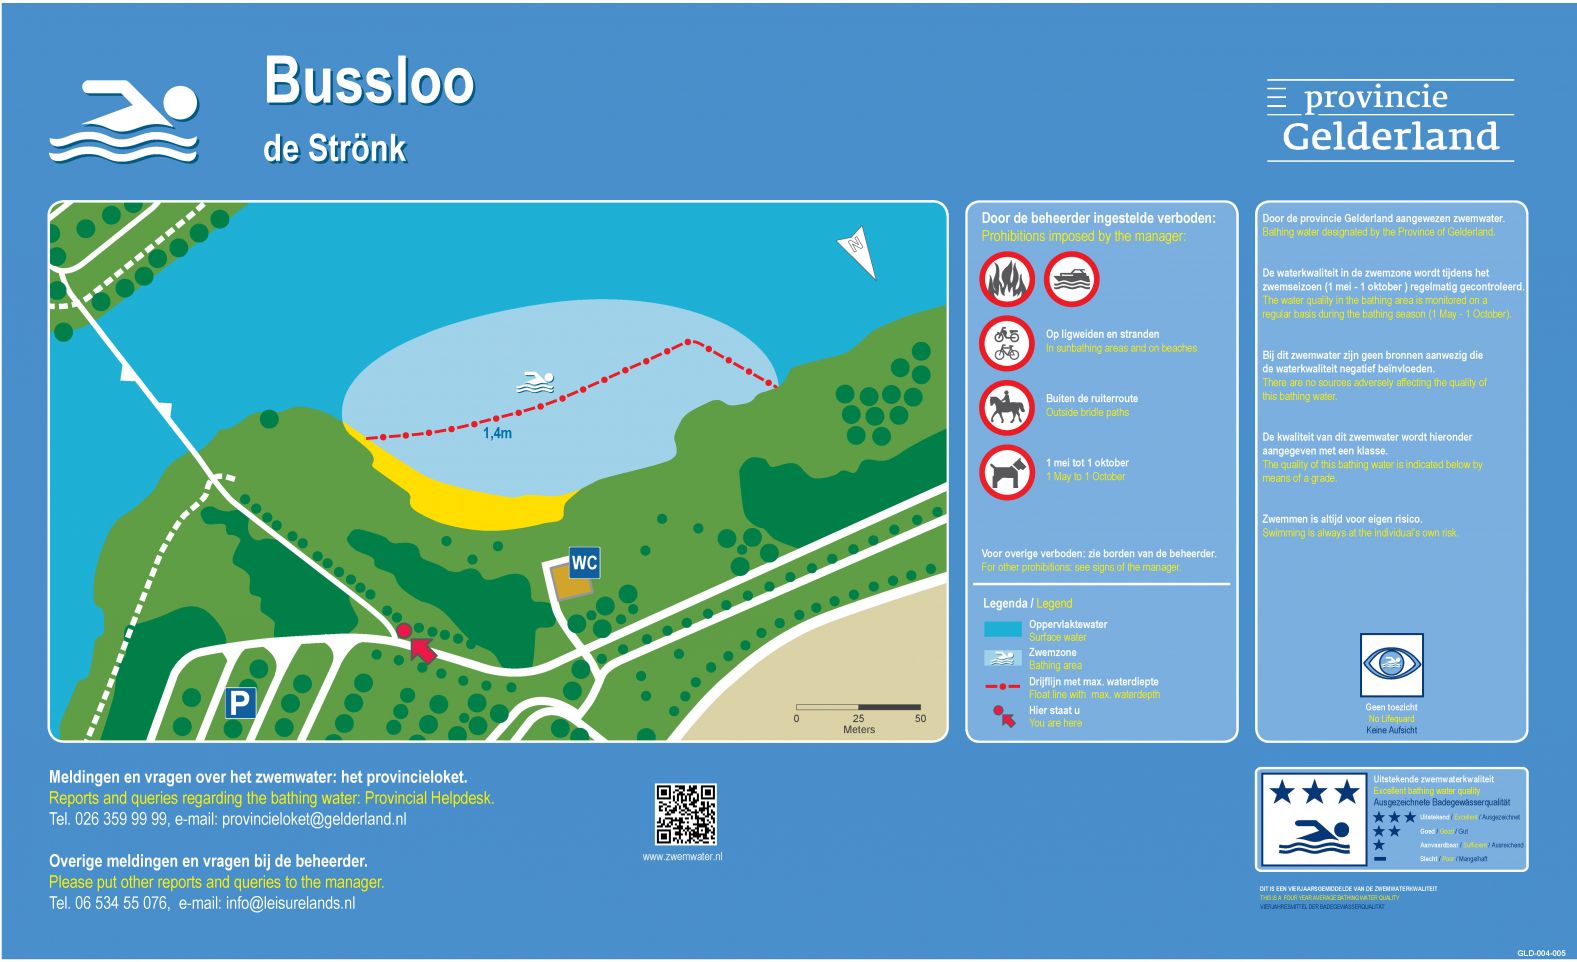 The information board at the swimming location Bussloo De Stronk